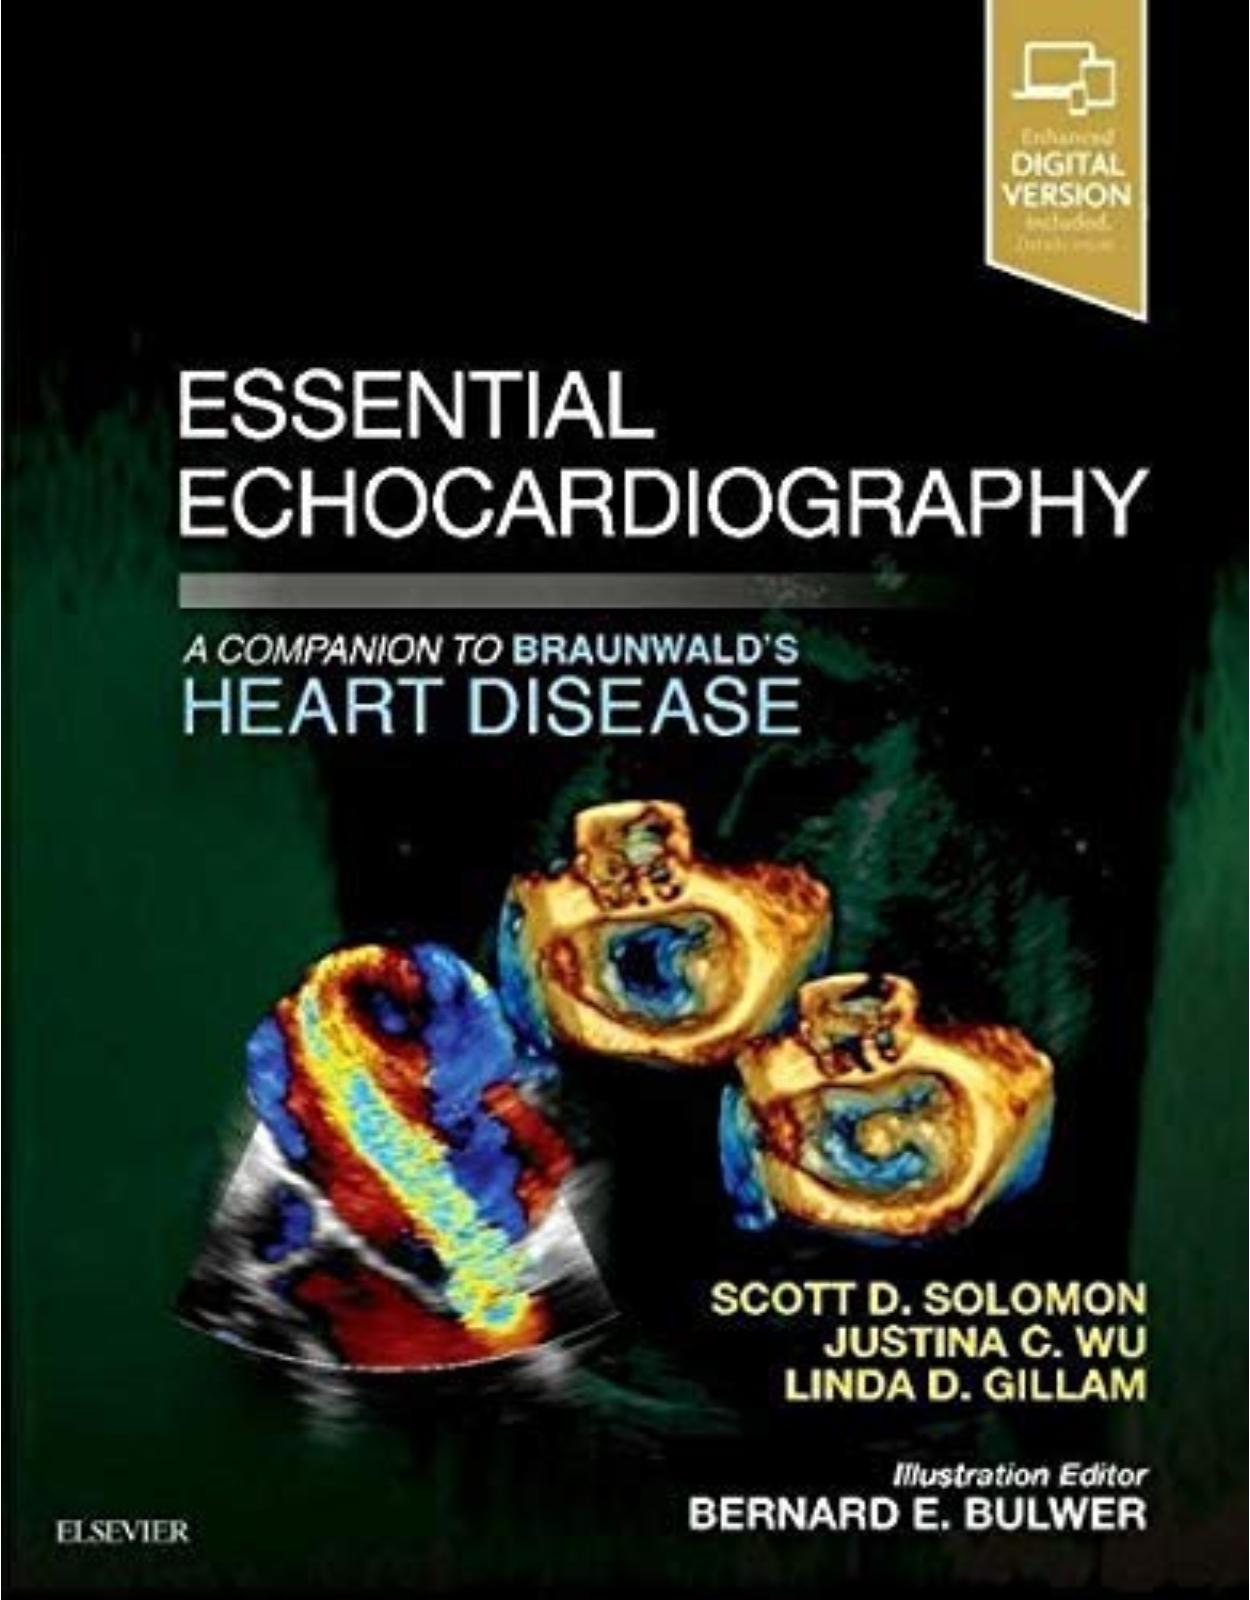 Essential Echocardiography: A Companion to Braunwald's Heart Disease, 1e 